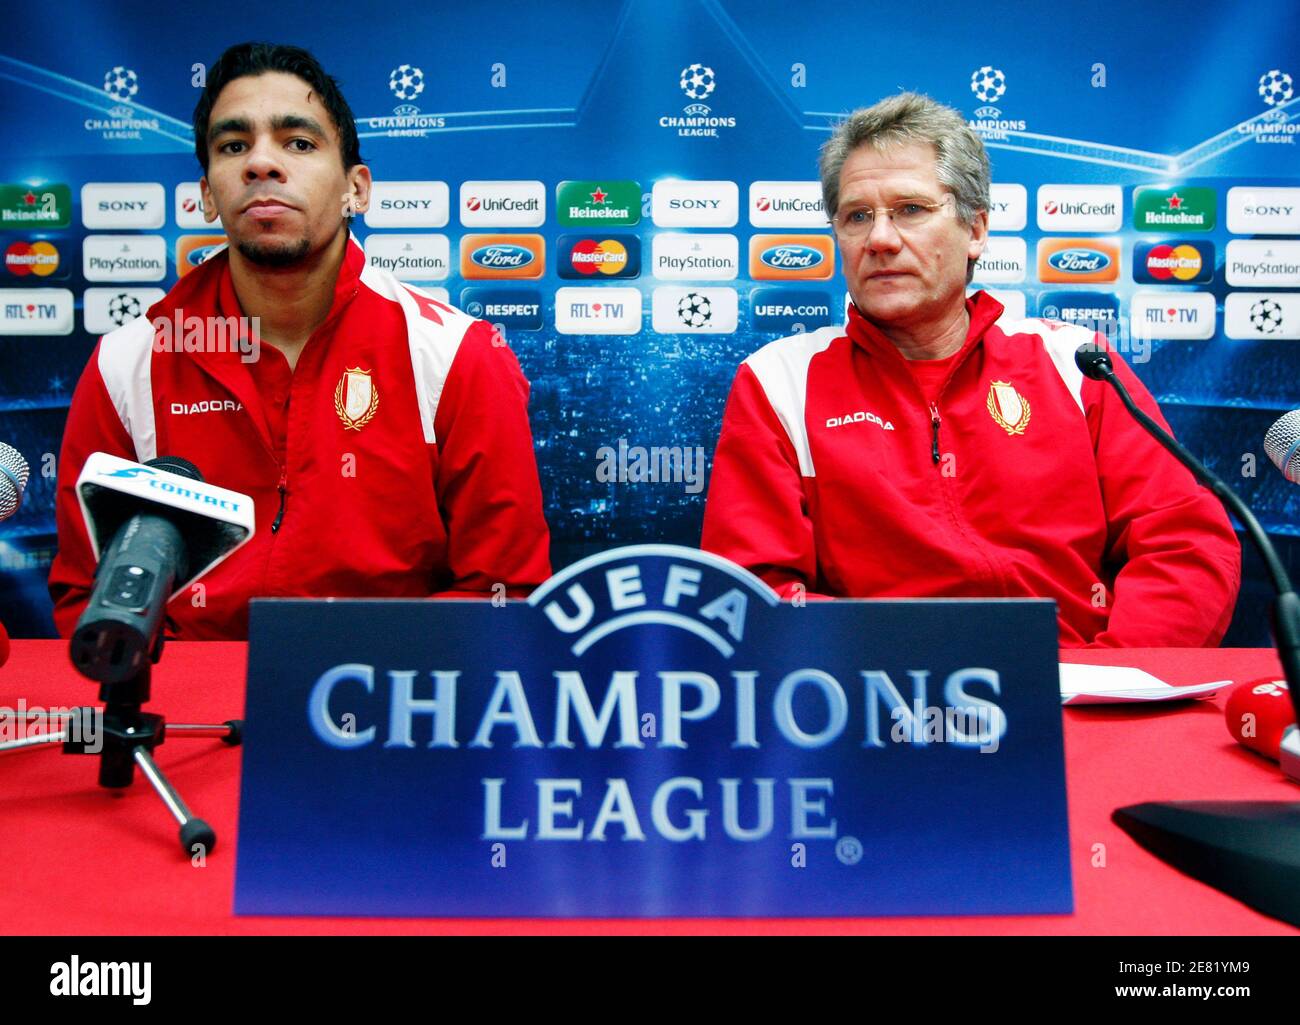 Standard Liege's coach Laszlo Boloni (R) and player Igor De Camargo address  a news conference in Liege December 8, 2009. Standard will play AZ Alkmaar  in the Champions League in Liege on